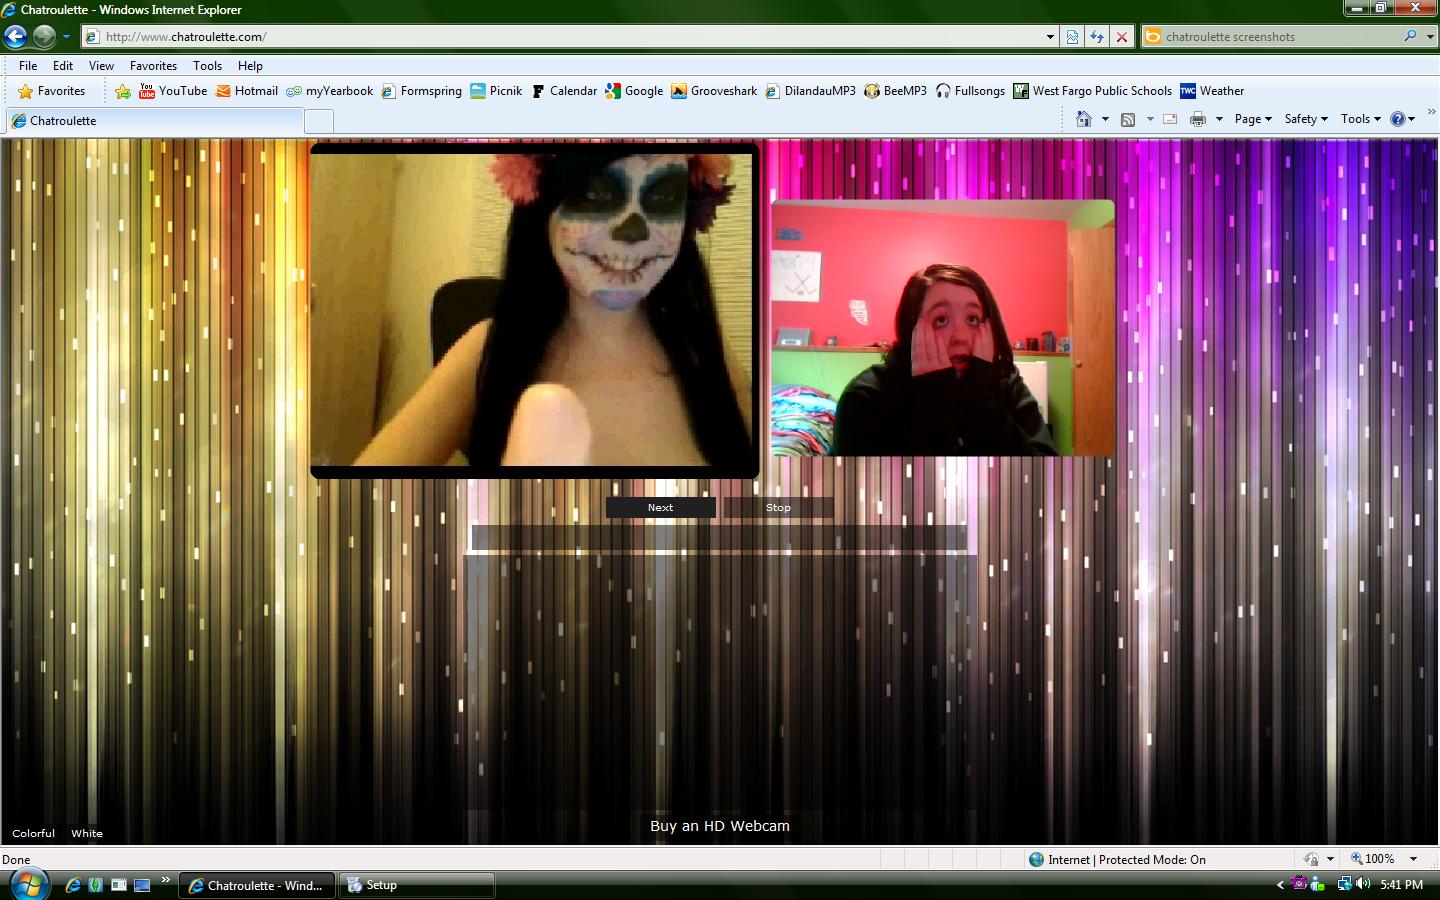 Chat Roulette Fun: